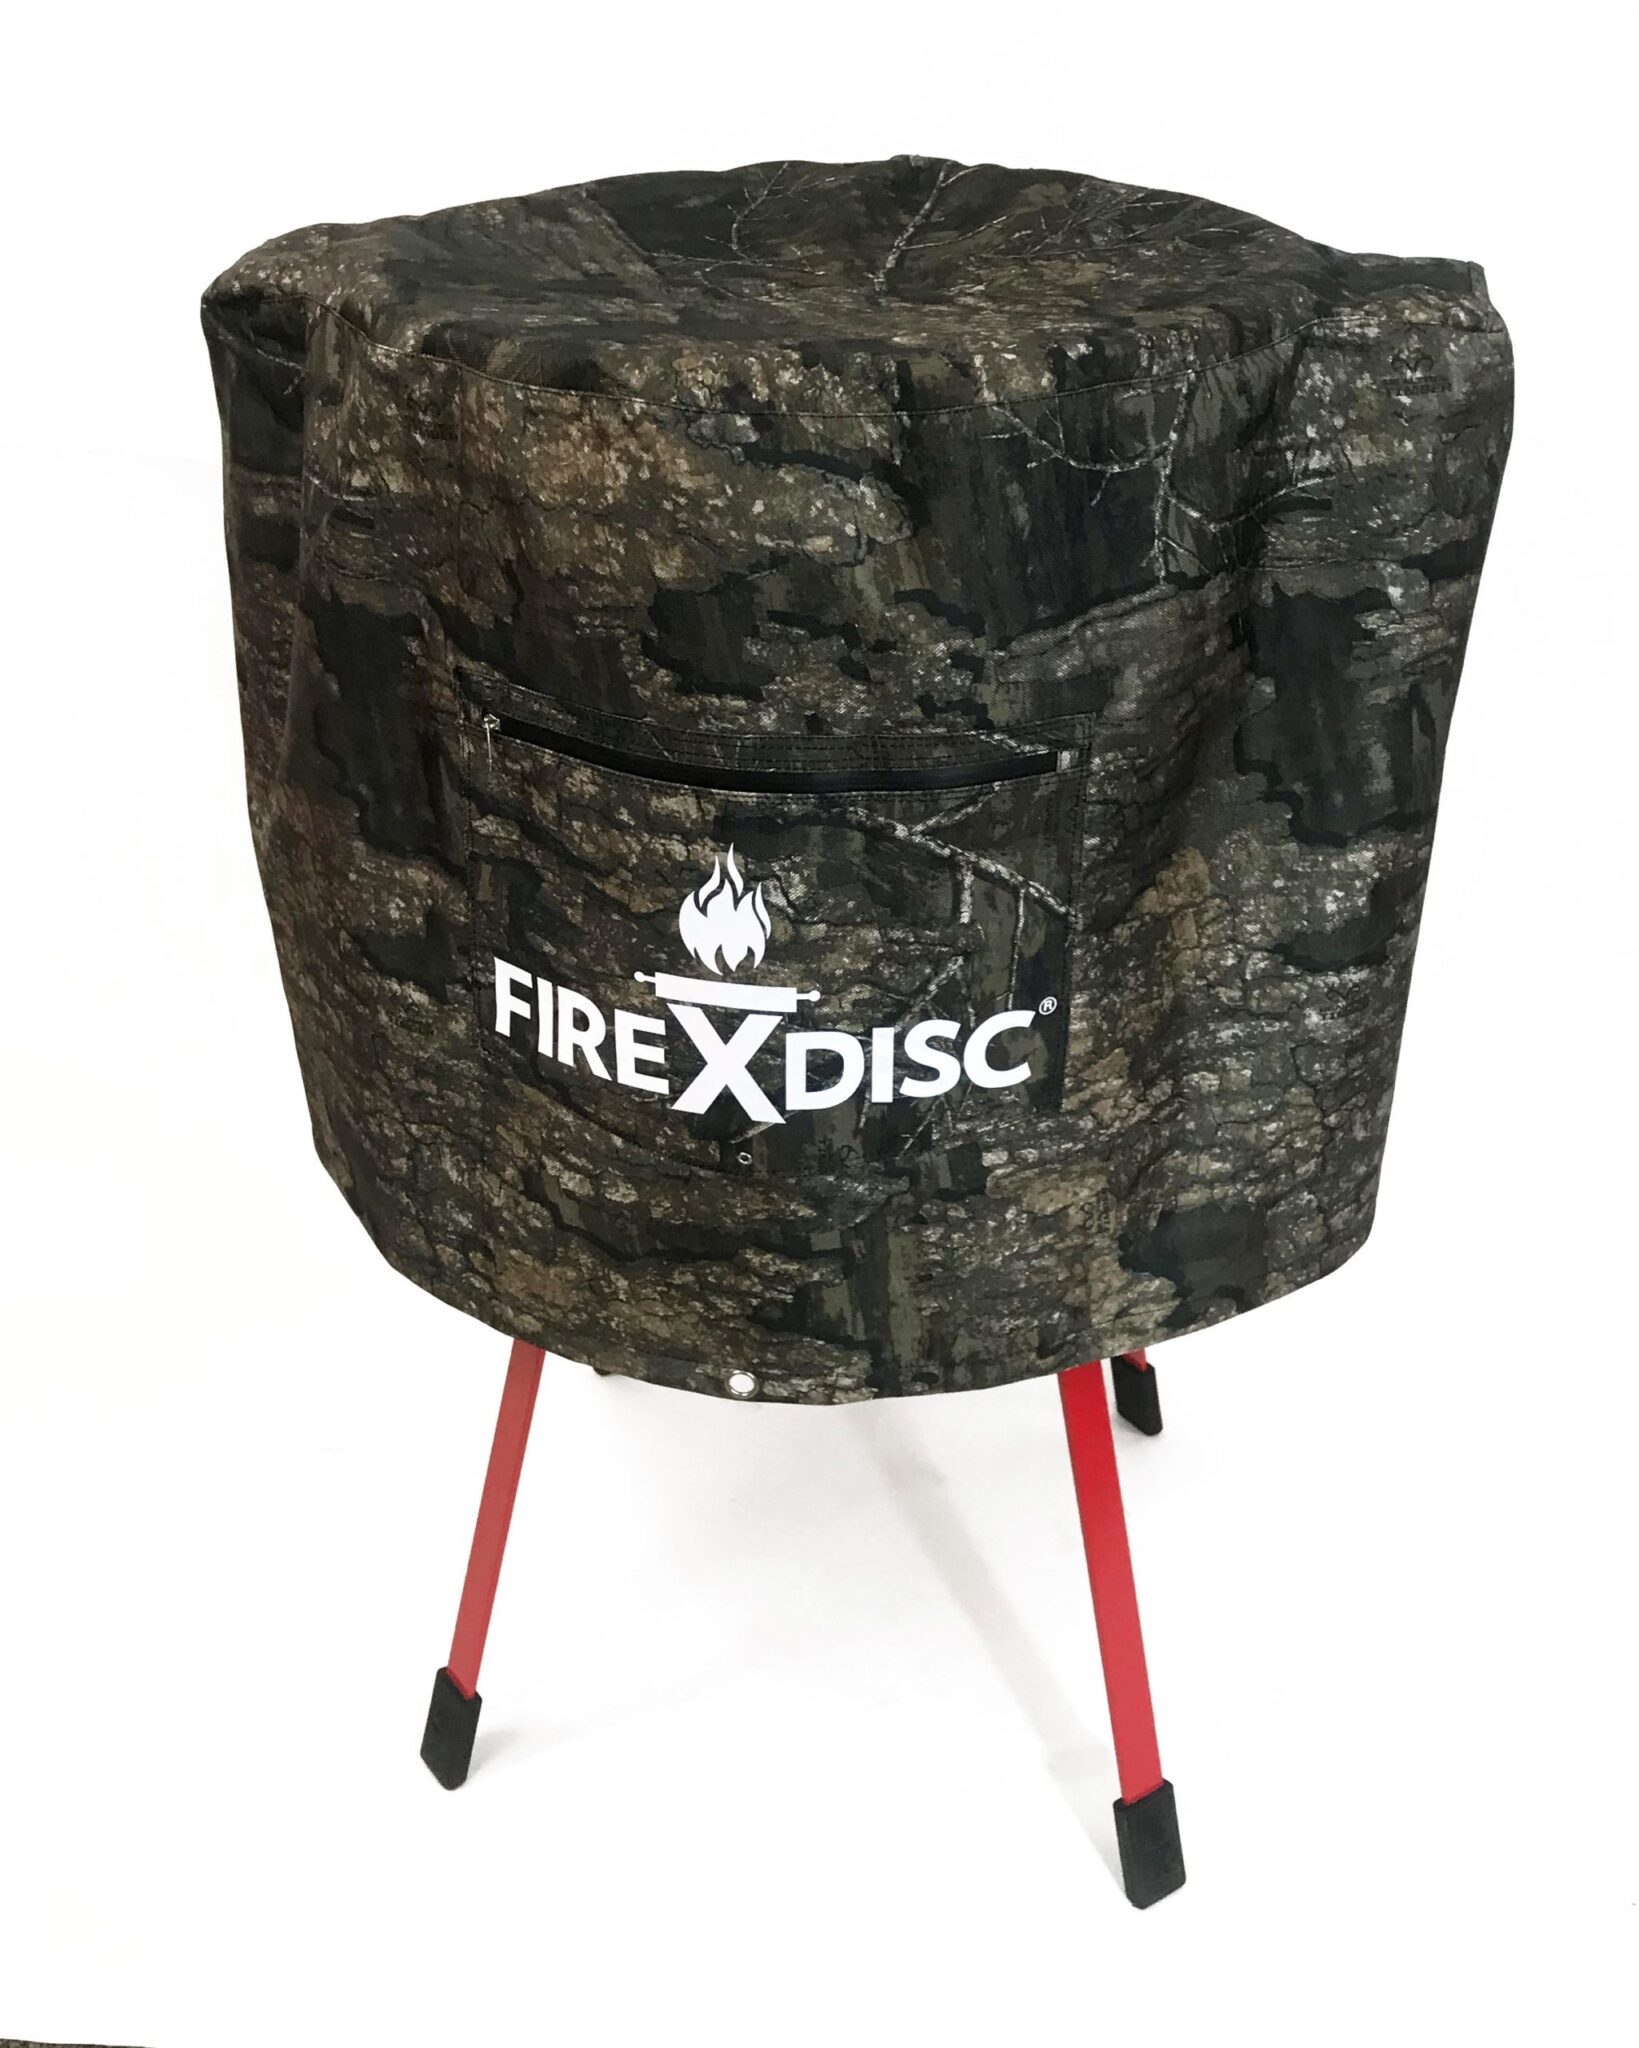 Realtree FireDisc Cover 11-7-19 (1)